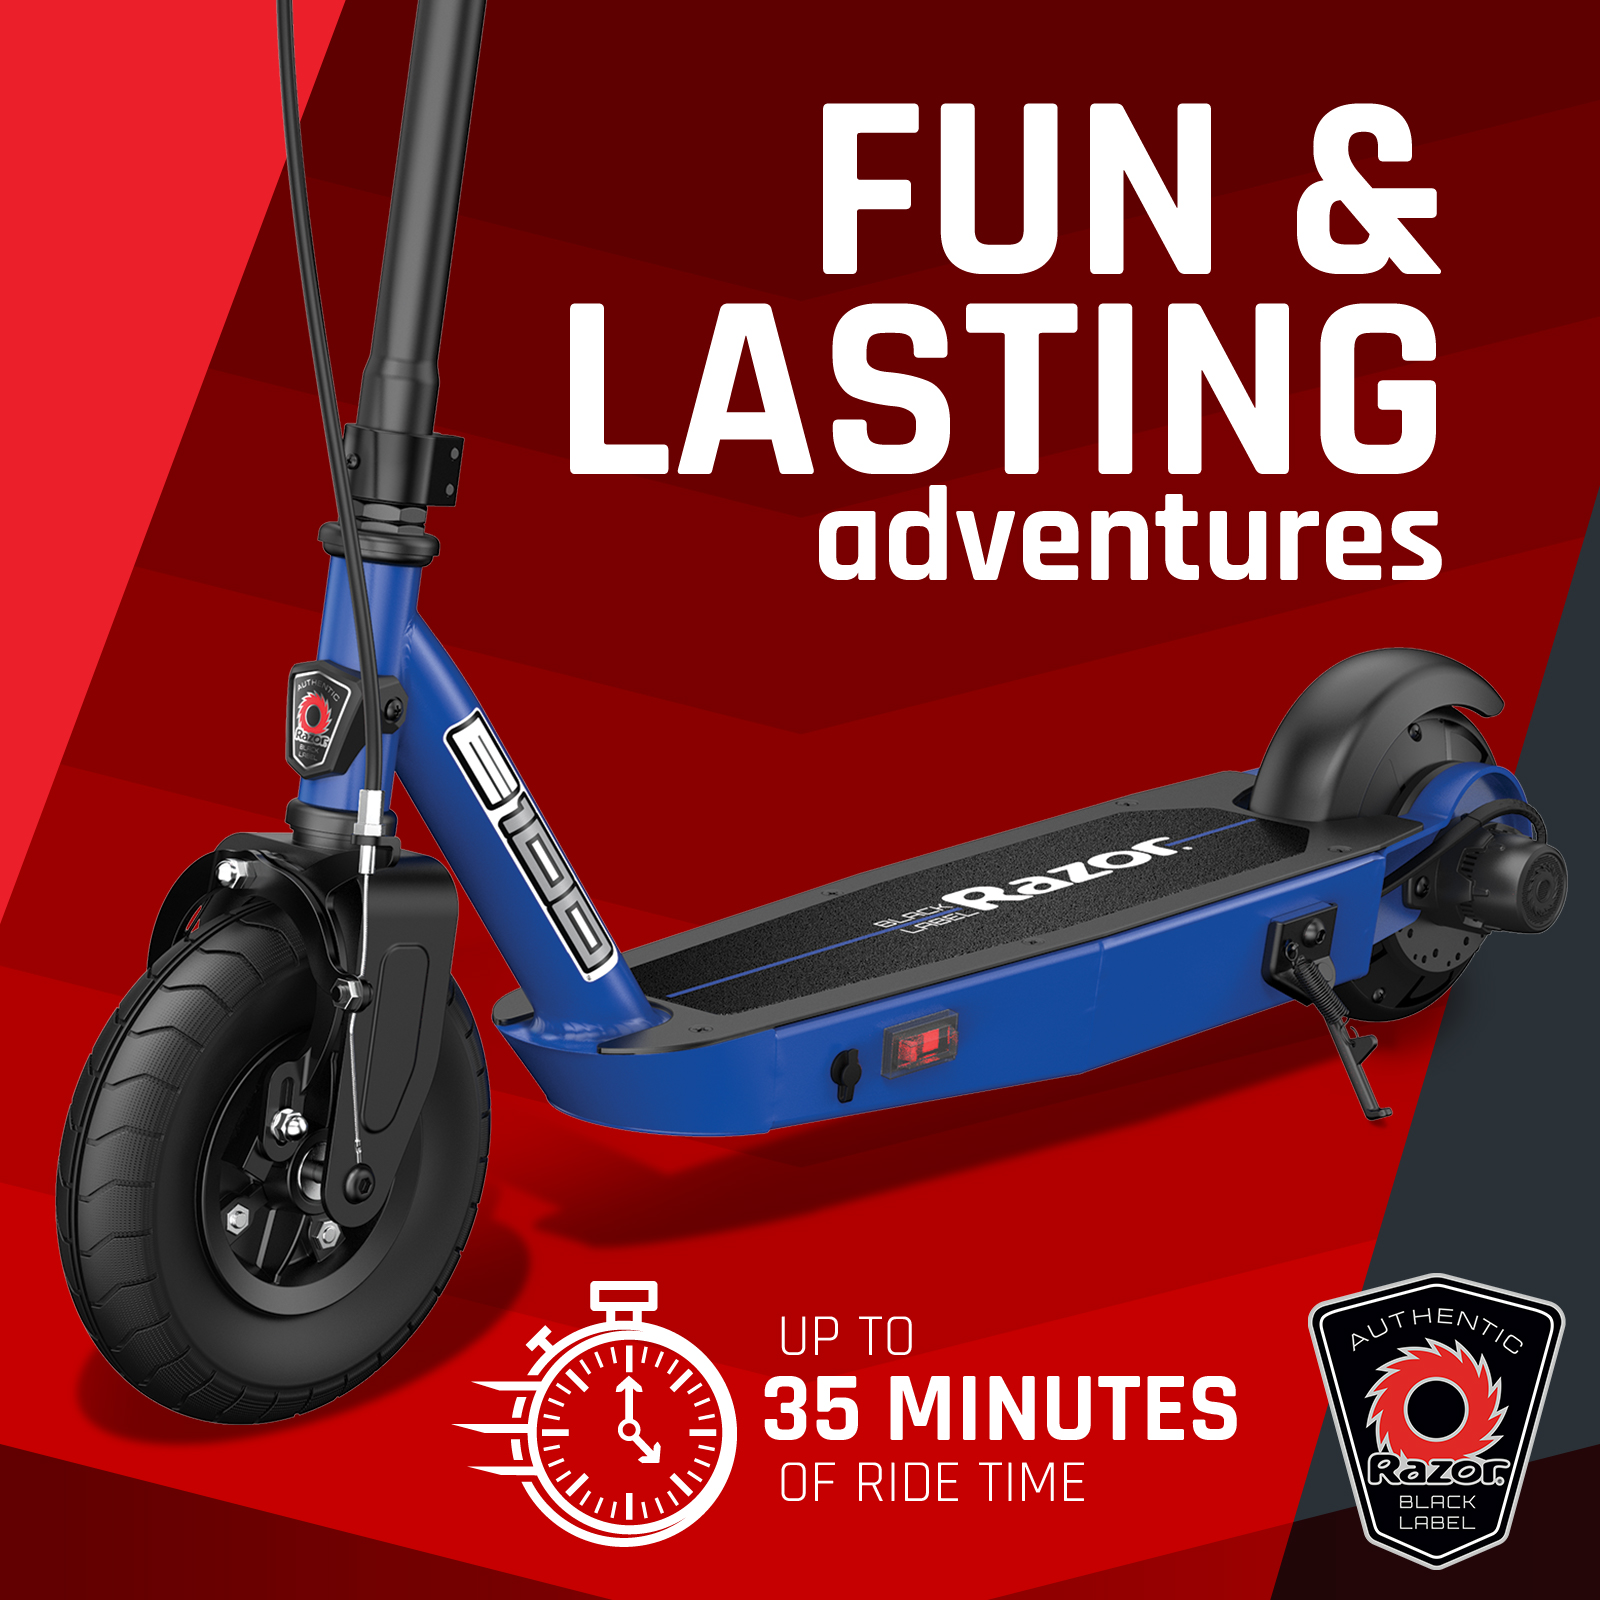 Razor Black Label E100 Electric Scooter – Blue, up to 10 mph, 8" Pneumatic Front Tire, for Kids Ages 8+ - image 8 of 14